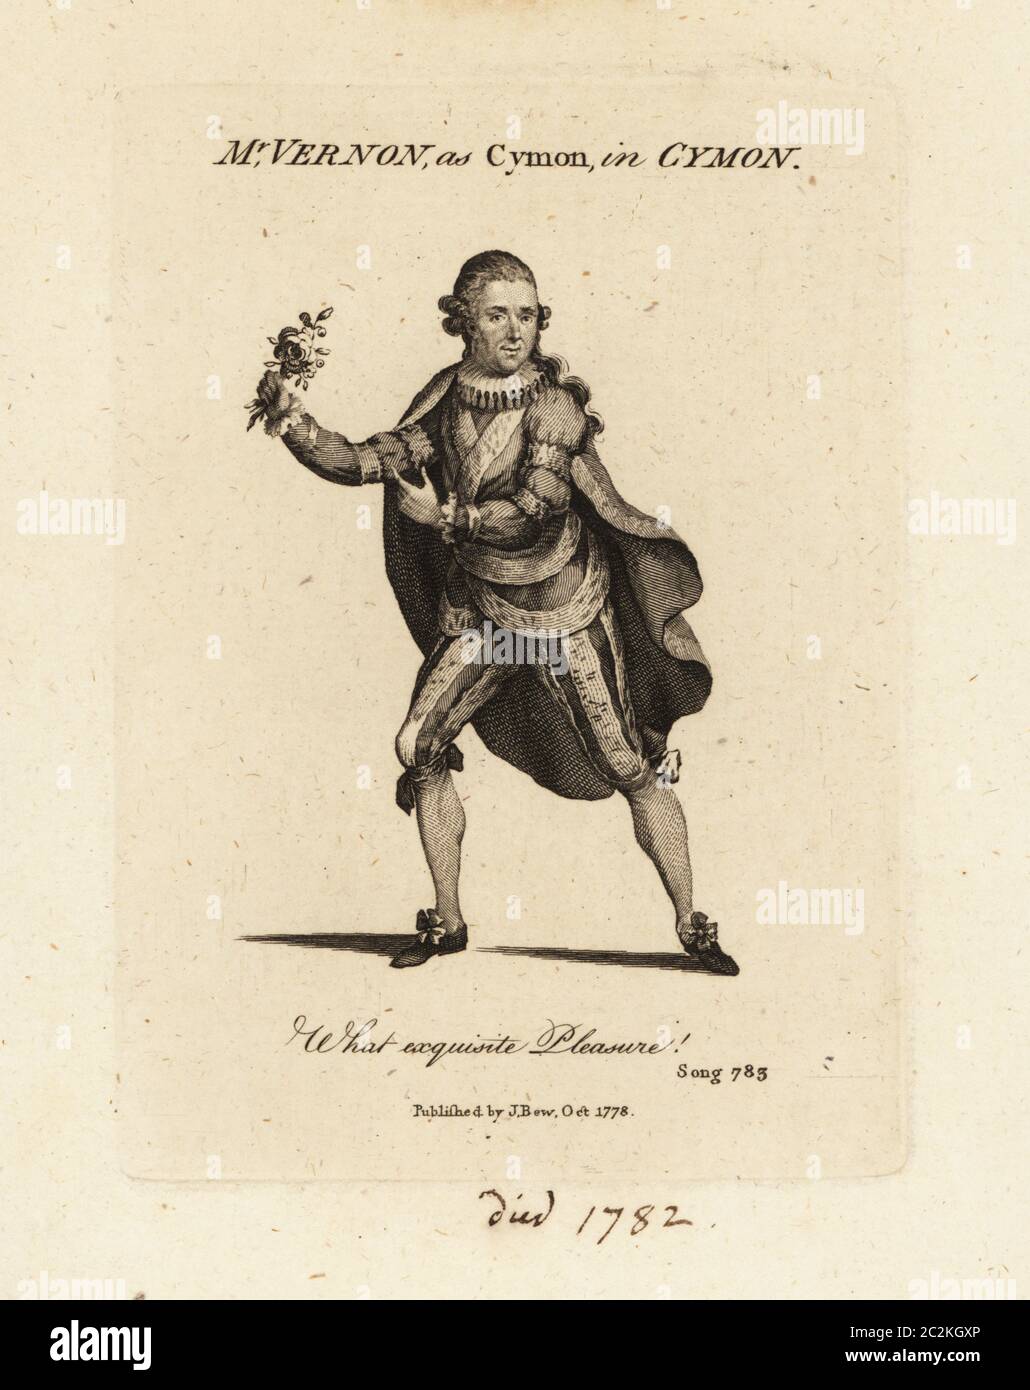 Mrs. Joseph Vernon as Cymon singing Thomas Arne’s cantata Cymon and Iphigenia. He holds a rose and wears a cape, ruff, doublet and breeches. Vernon (1731-1782), actor and singer who appeared in Queen Mab and The Beggar's Opera. Copperplate engraving from the 'Vocal Magazine' published by J. Bew, 1778. Stock Photo